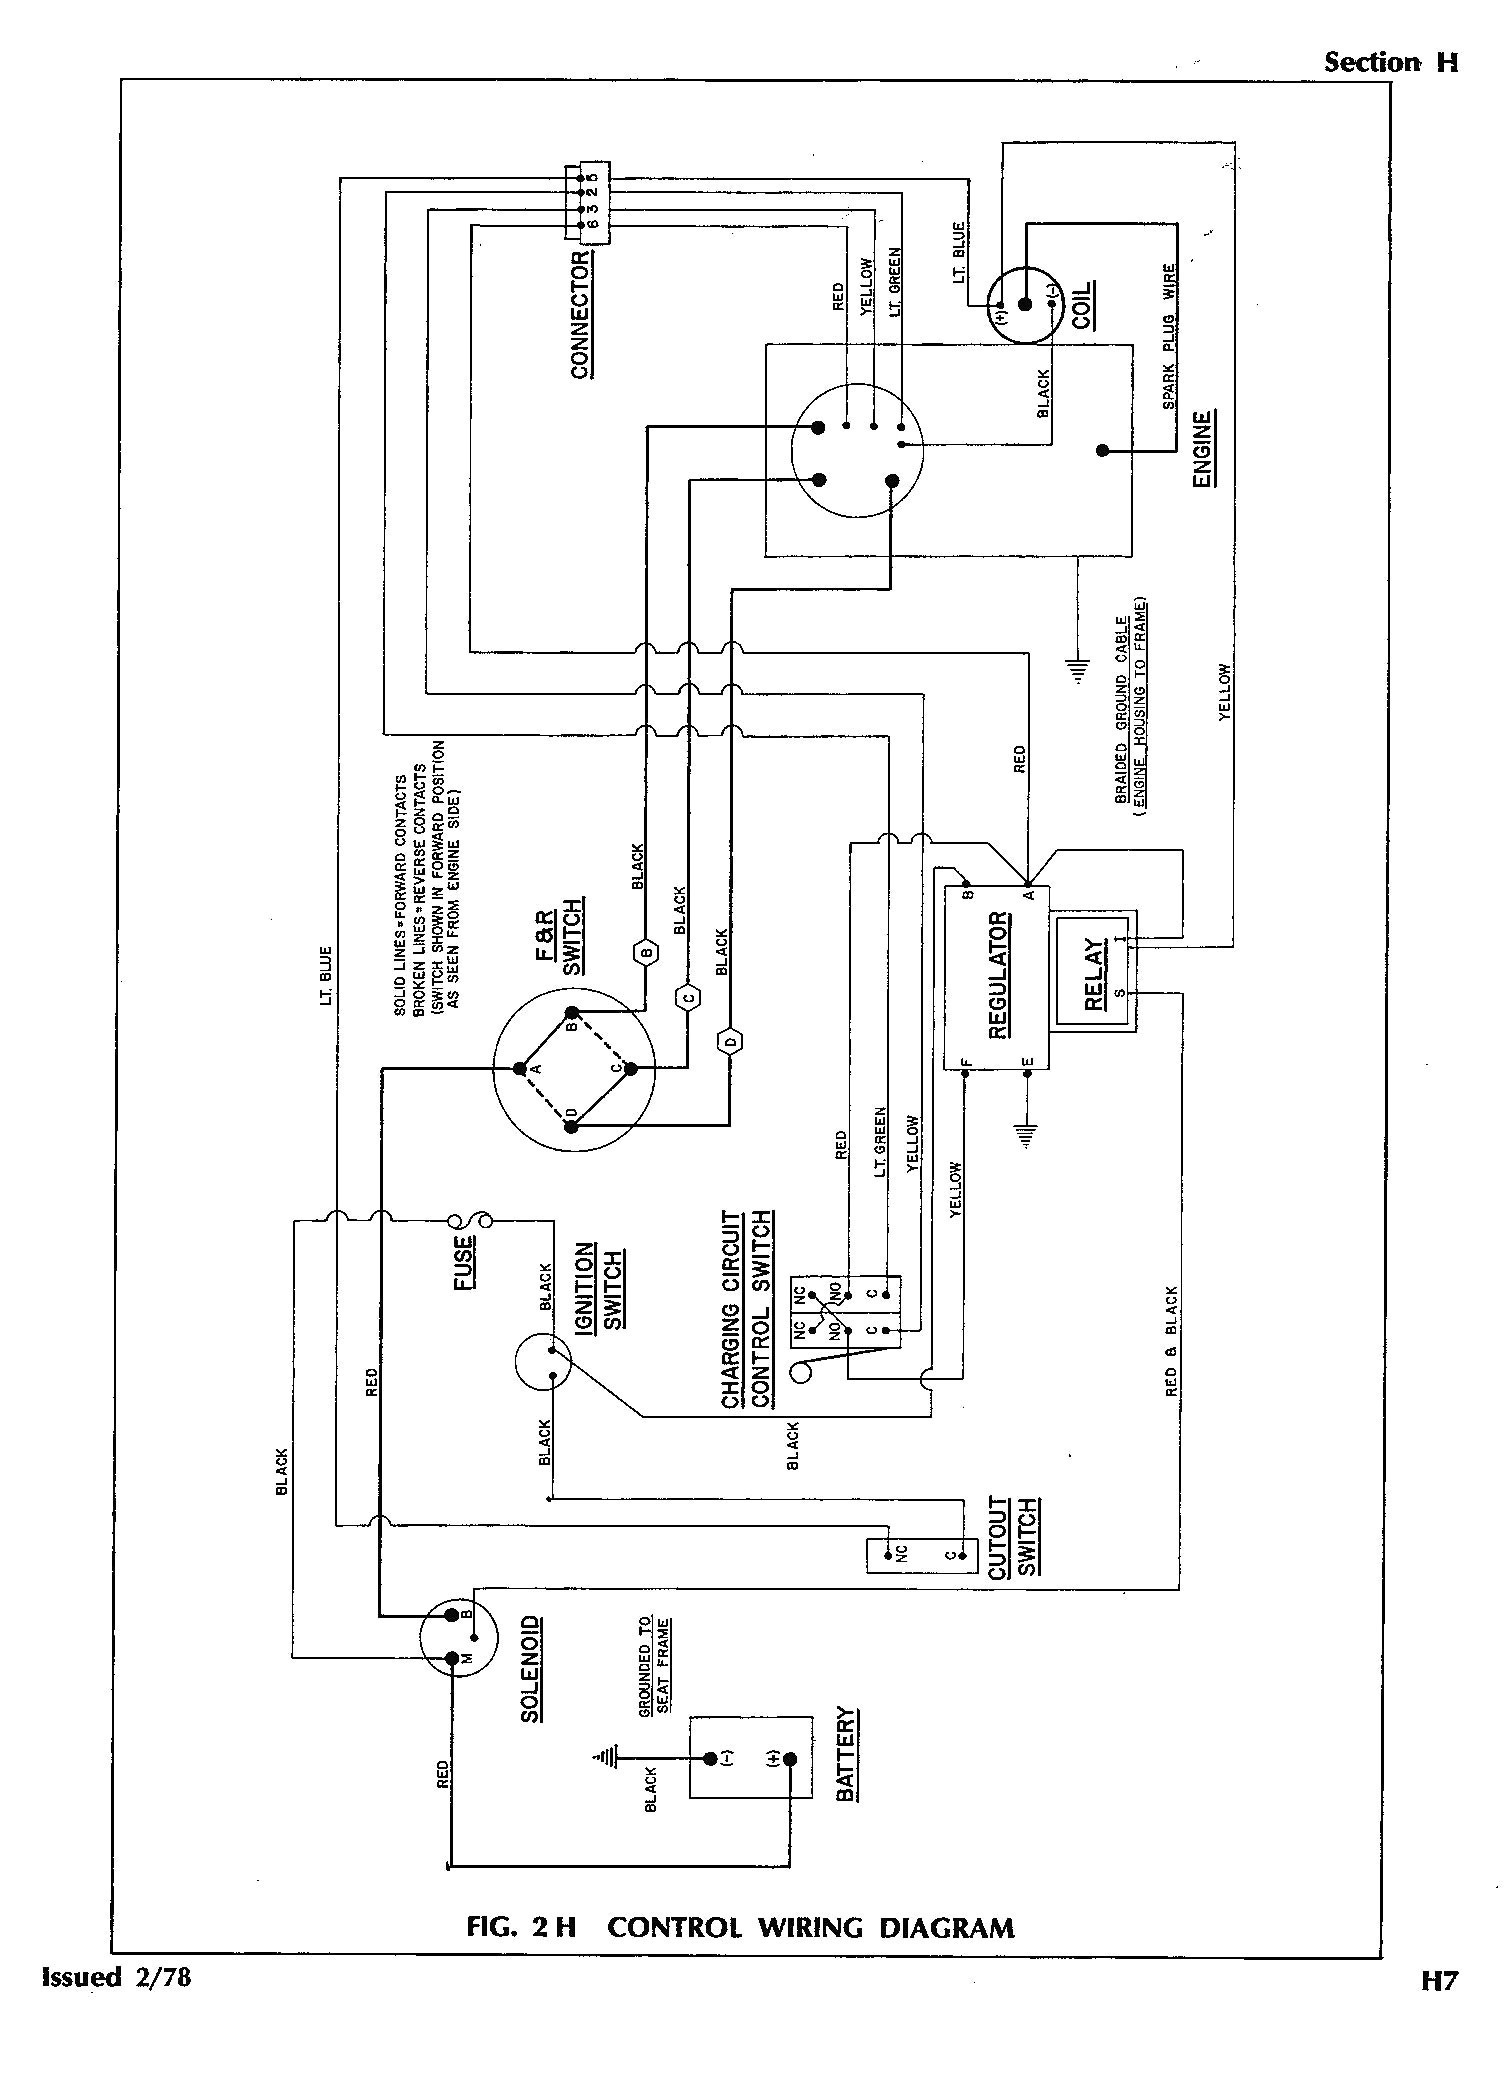 Wiring Diagrams for Yamaha Golf Carts Valid Wiring Diagram for 2002